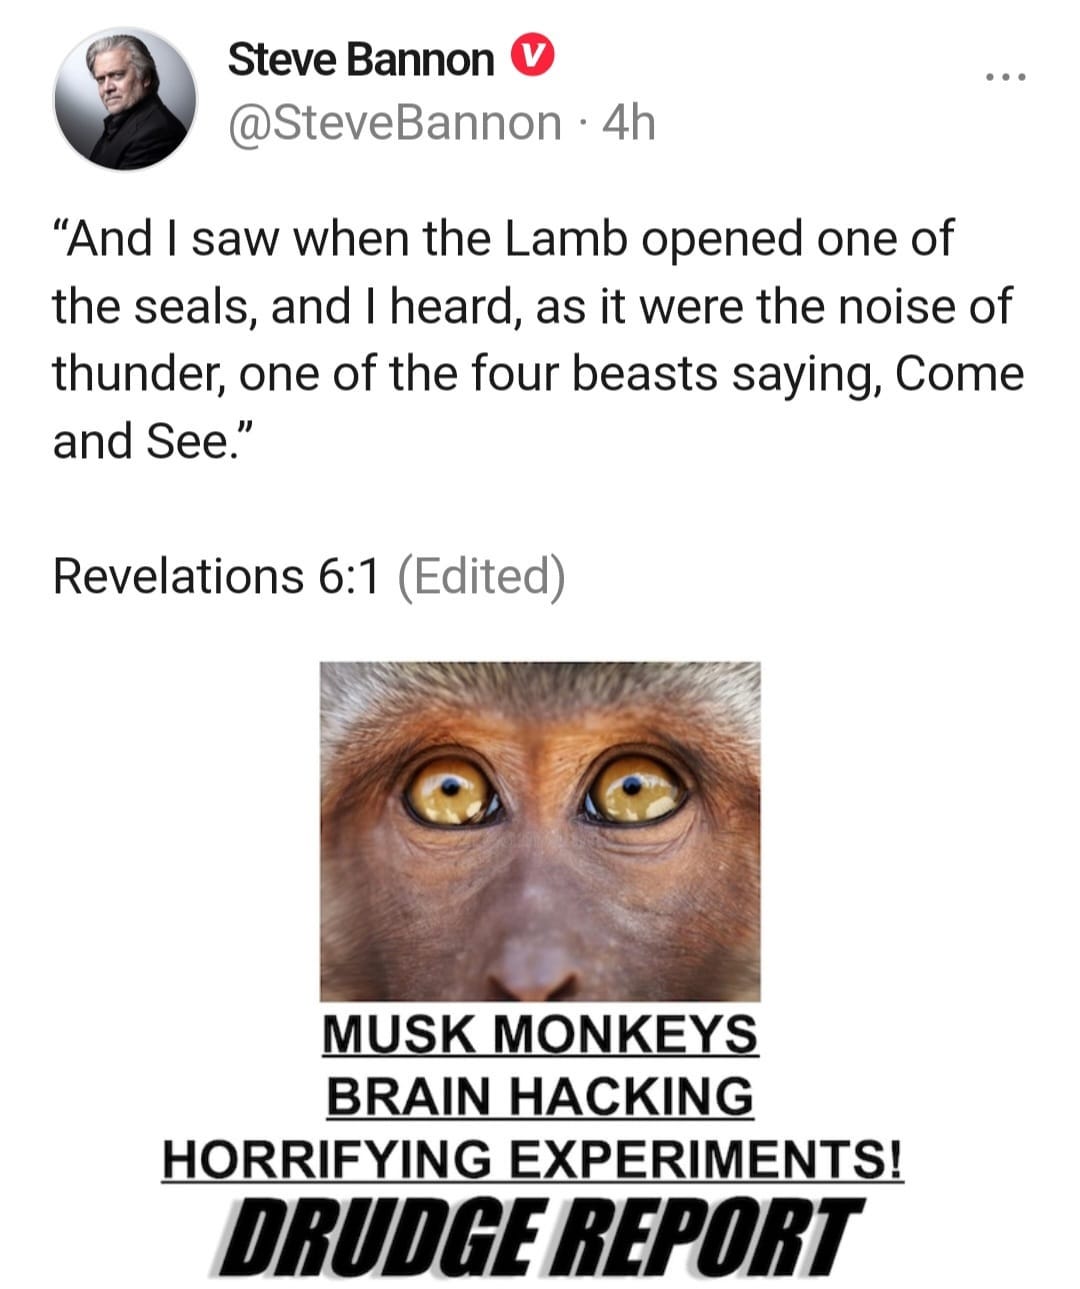 May be an image of 1 person and text that says 'Steve Bannon @SteveBannon 4h "And I saw when the Lamb opened one of the seals, and heard, as it were the noise of thunder, one of the four beasts saying, Come and See." Revelations 6:1 (Edited) MUSK MONKEYS BRAIN HACKING HORRIFYING EXPERIMENTS! DRUDGE REPORT'